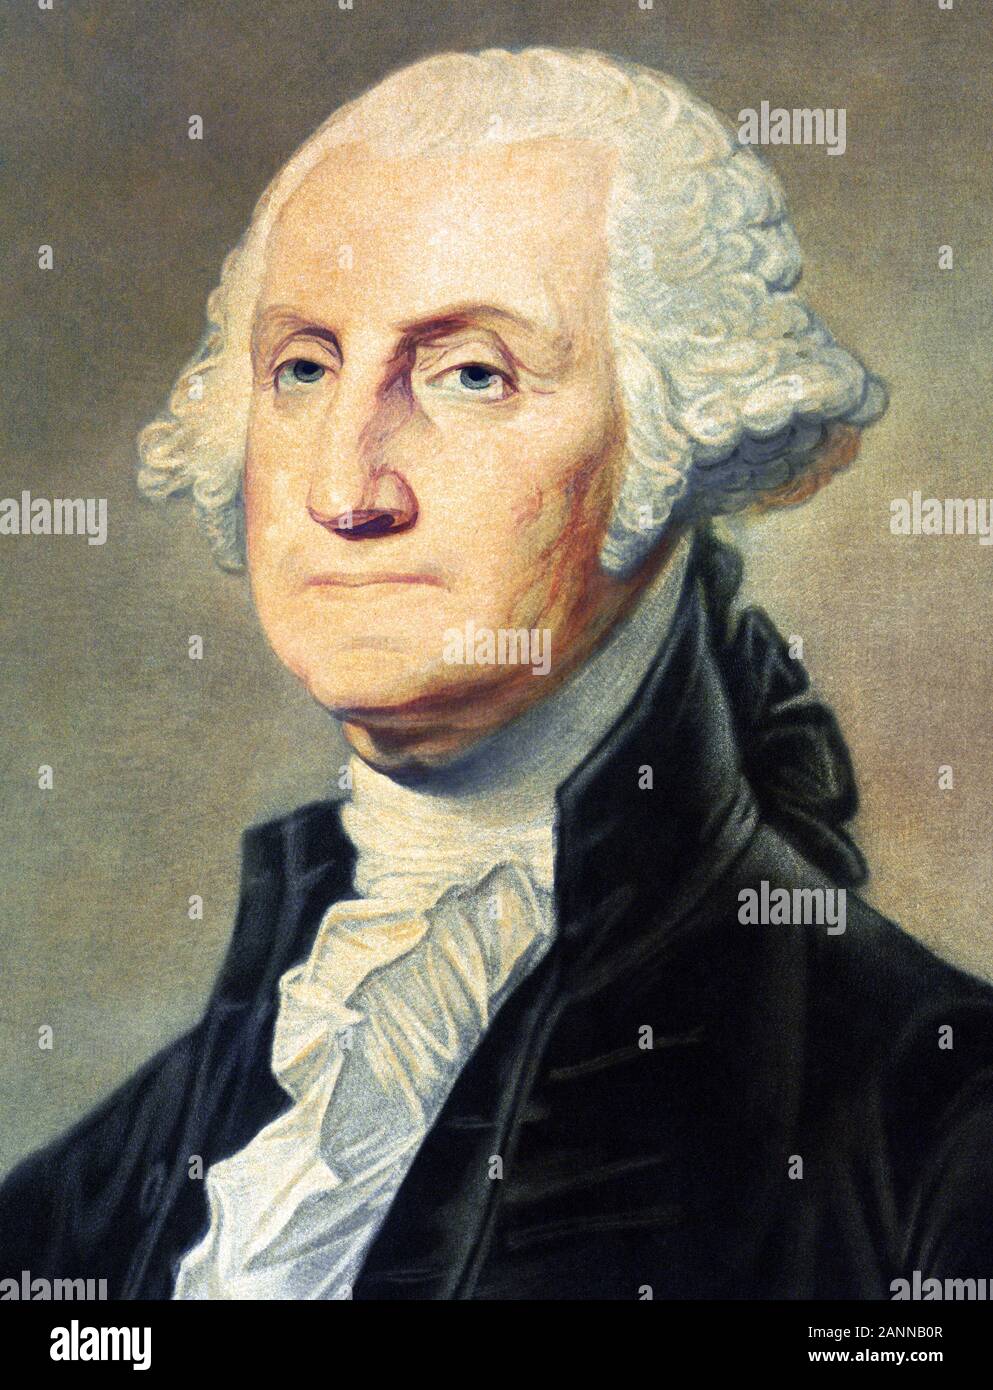 Vintage portrait of George Washington (1732 - 1799) – Commander of the Continental Army in the American Revolutionary War / War of Independence (1775 – 1783) and the first US President (1789 - 1797). Detail from a print circa 1813 by Freeman of Philadelphia. Stock Photo